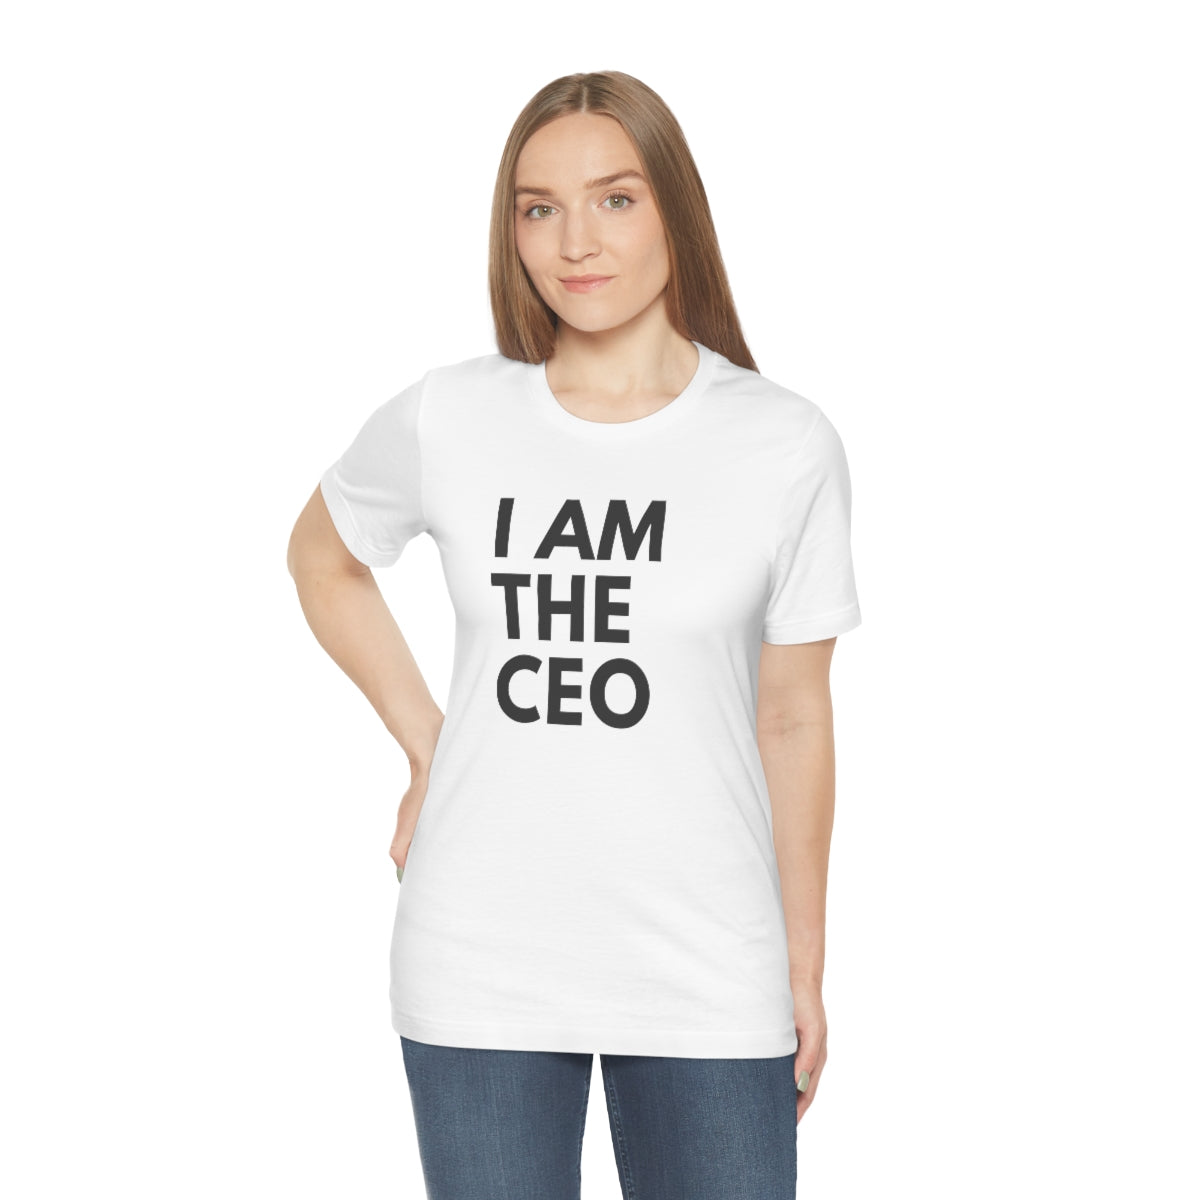 I AM THE CEO Type Tee | Inspiration Tee | Entrepreneur | Business Owner | Motivation | Unisex Jersey Short Sleeve